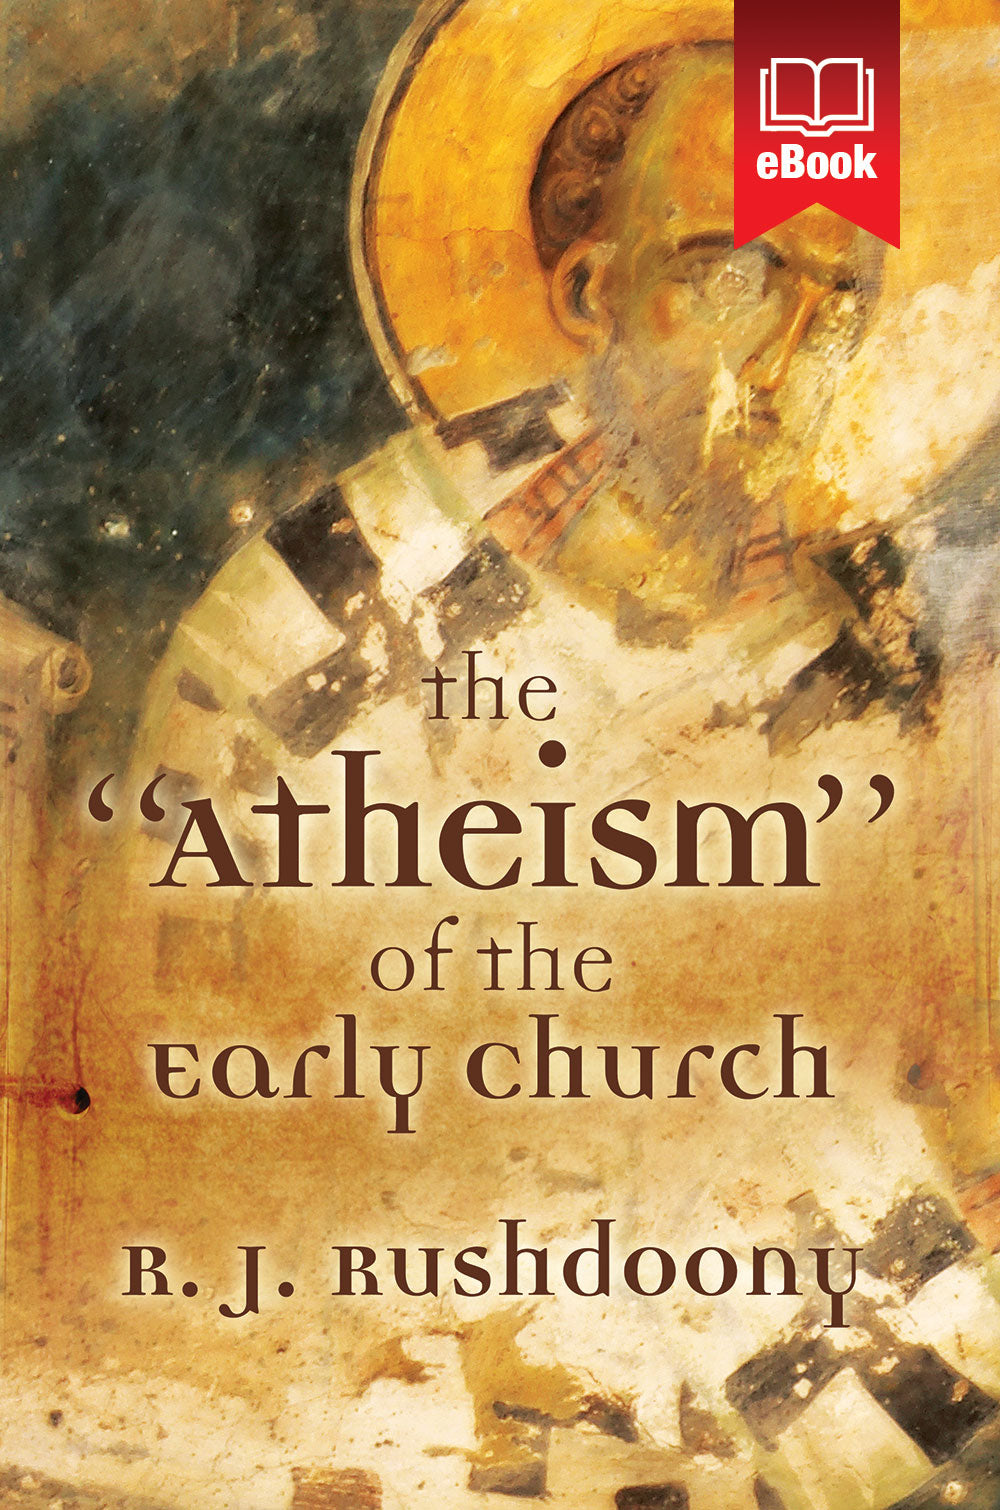 Atheism of the Early Church